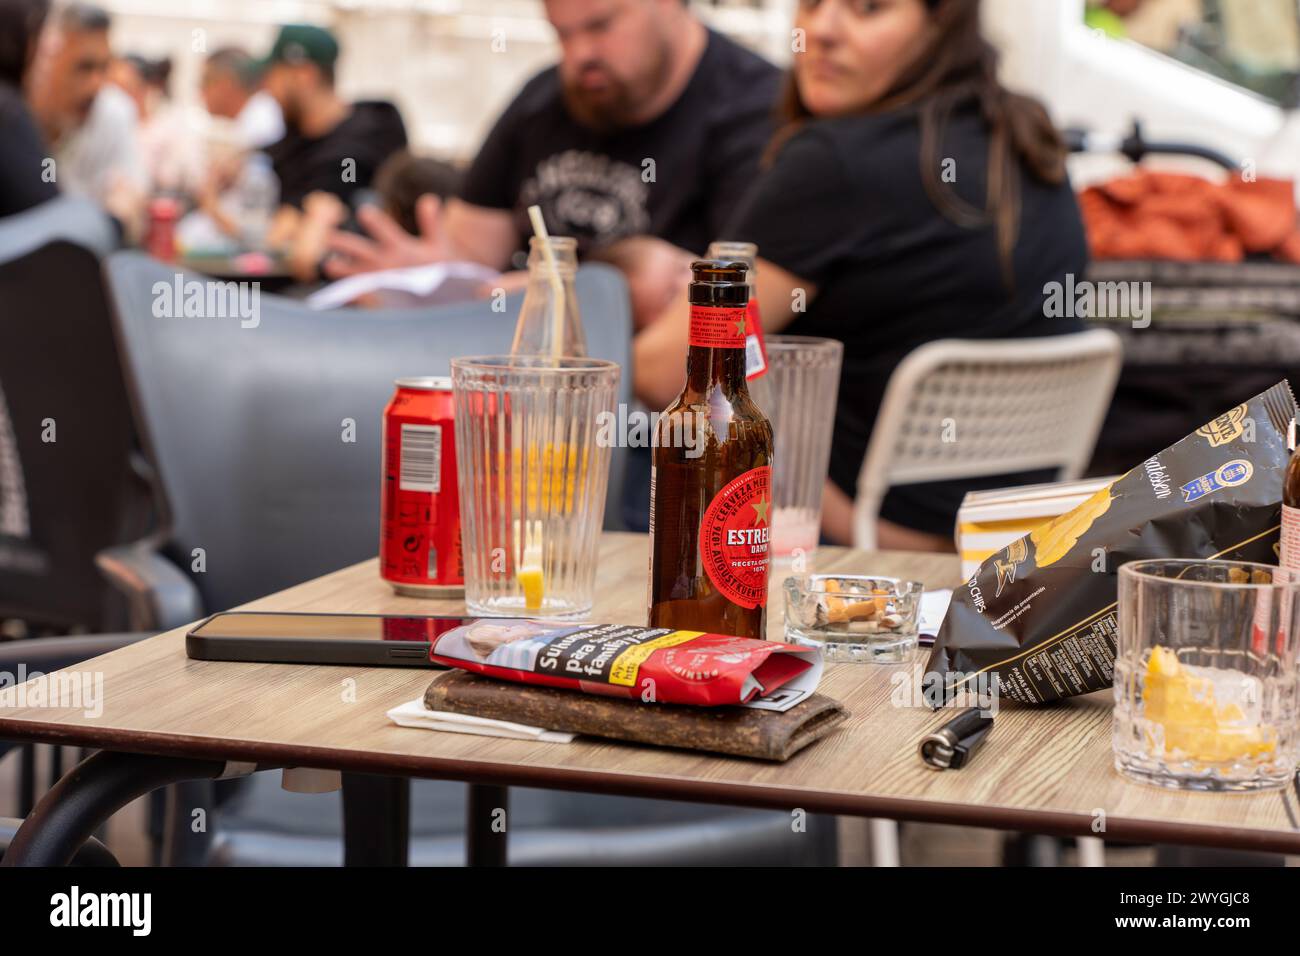 Barcelona, Spain. 06th Apr, 2024. Spain is finalizing the anti-smoking law, one of the aims of which is to prohibit smoking tobacco outdoors in front of bars, as well as regulating vaping. Espa&#xf1;a está finalizando la ley antitabaco, una de cuyas pretensiones es prohibir fumar tabaco al aire libre frente a los bares, as&#xed; como regular el vapeo. News politics-Barcelona, Spain saturday, April 6 2024 (Photo by Eric Renom/LaPresse) Credit: LaPresse/Alamy Live News Stock Photo